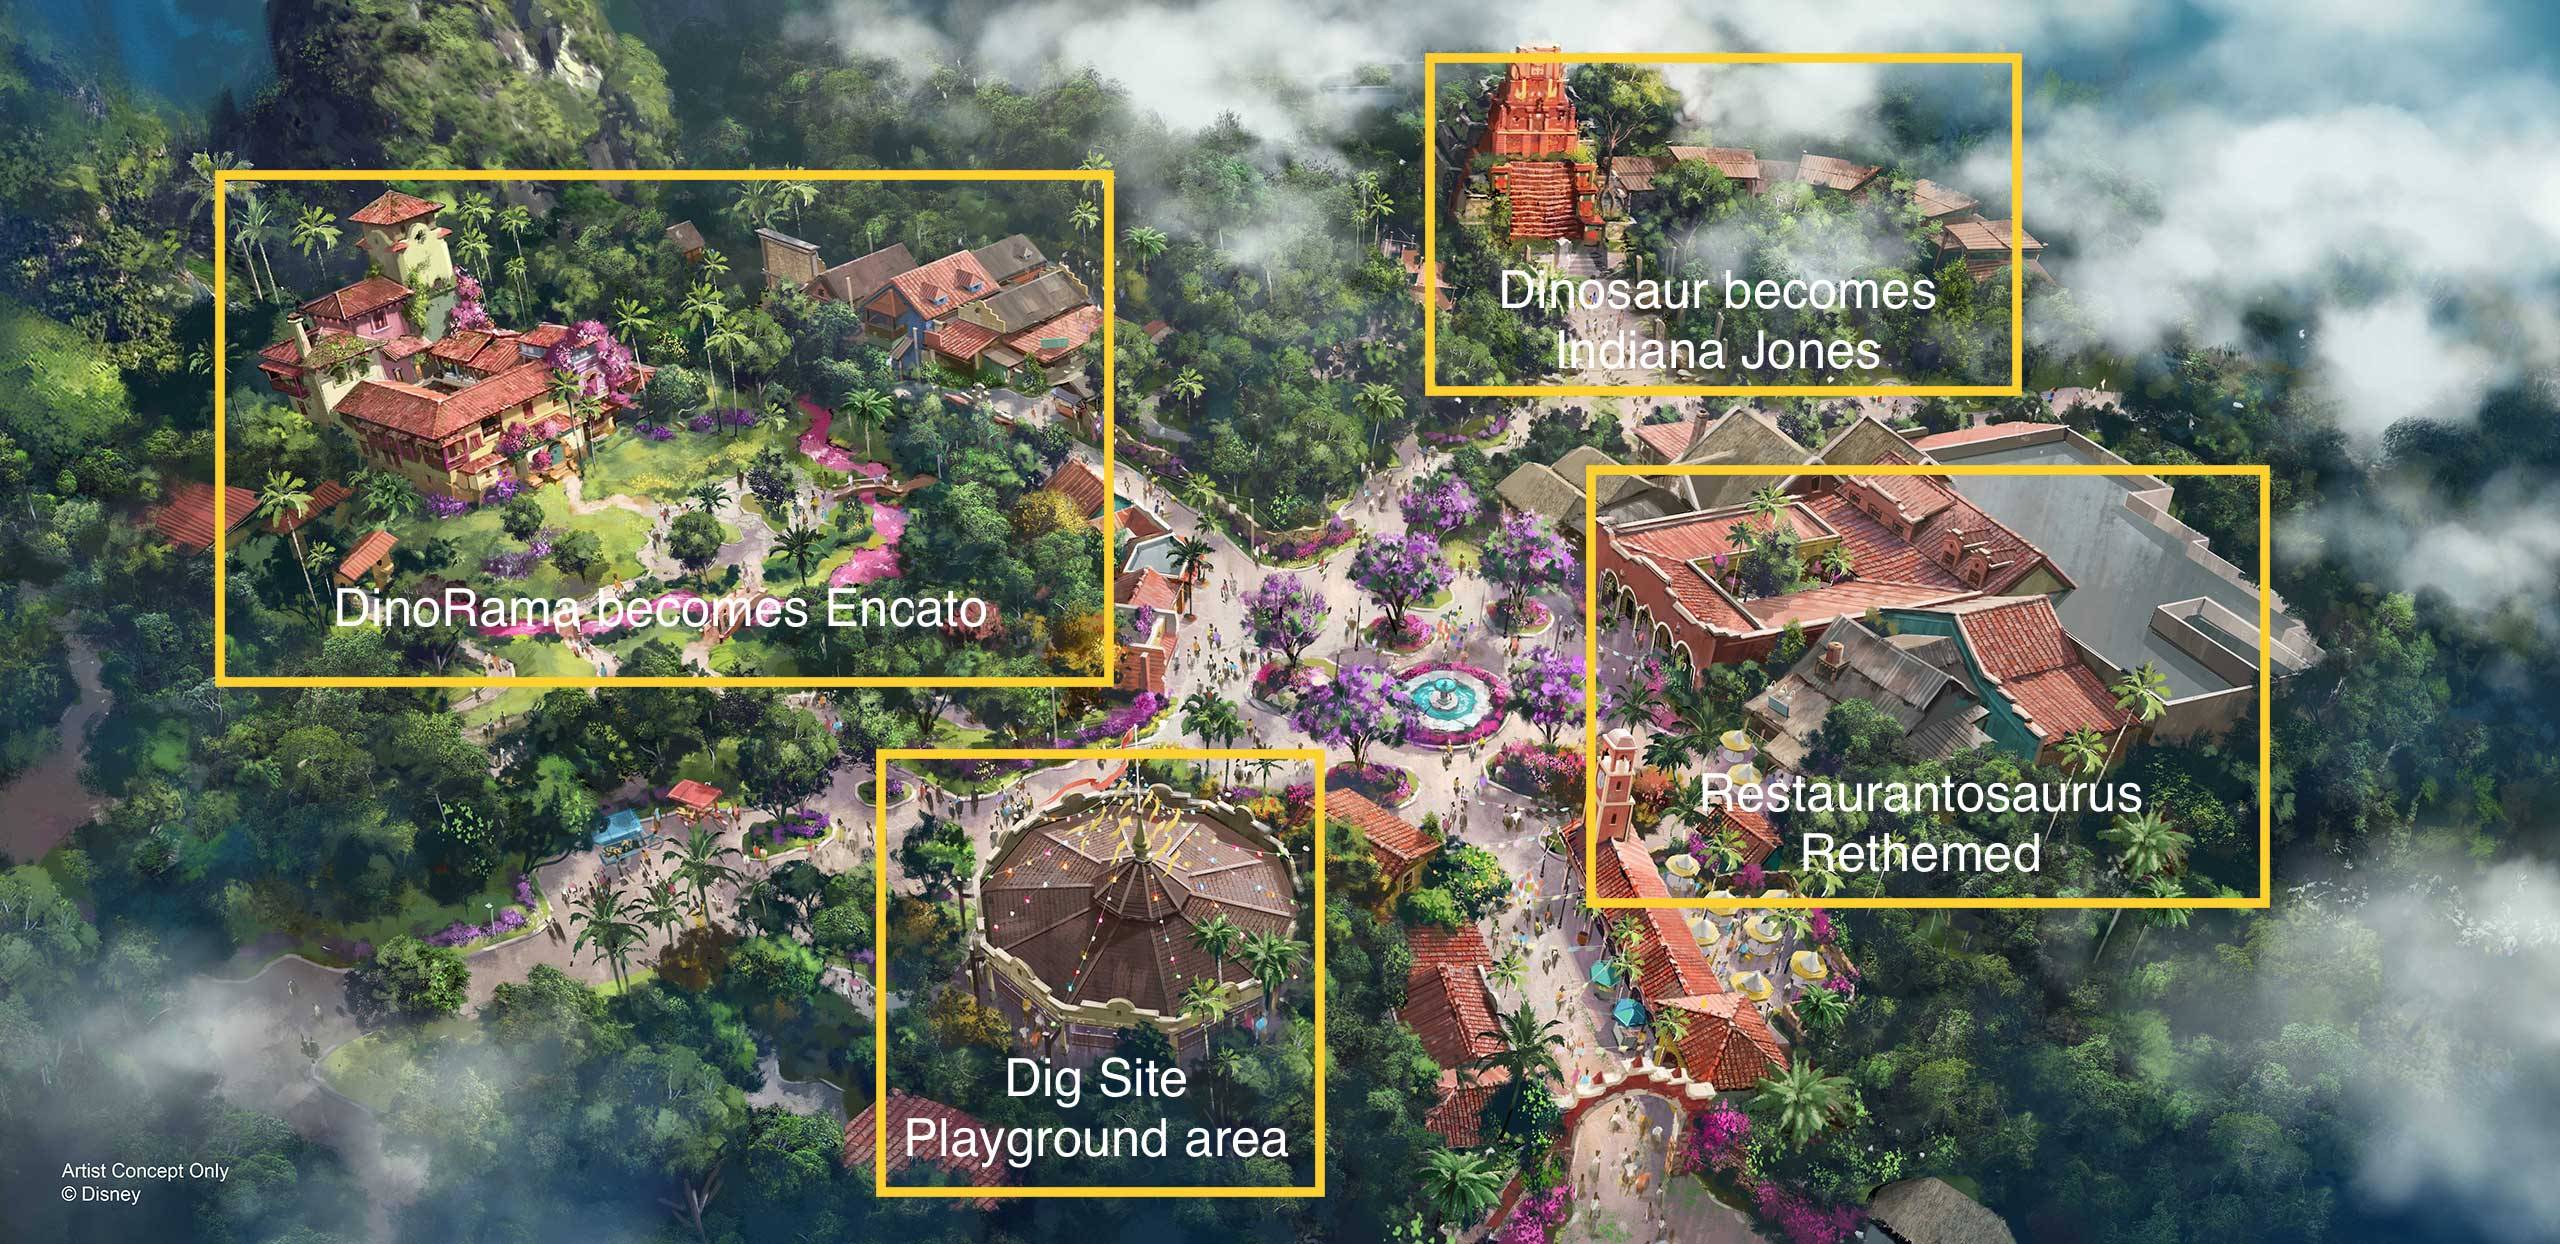 New experiences inspired by “Encanto” – the Academy Award winning Walt Disney Animation Studios film – and the fan-favorite adventurer Indiana Jones are being considered for the reimagined land at Disney’s Animal Kingdom